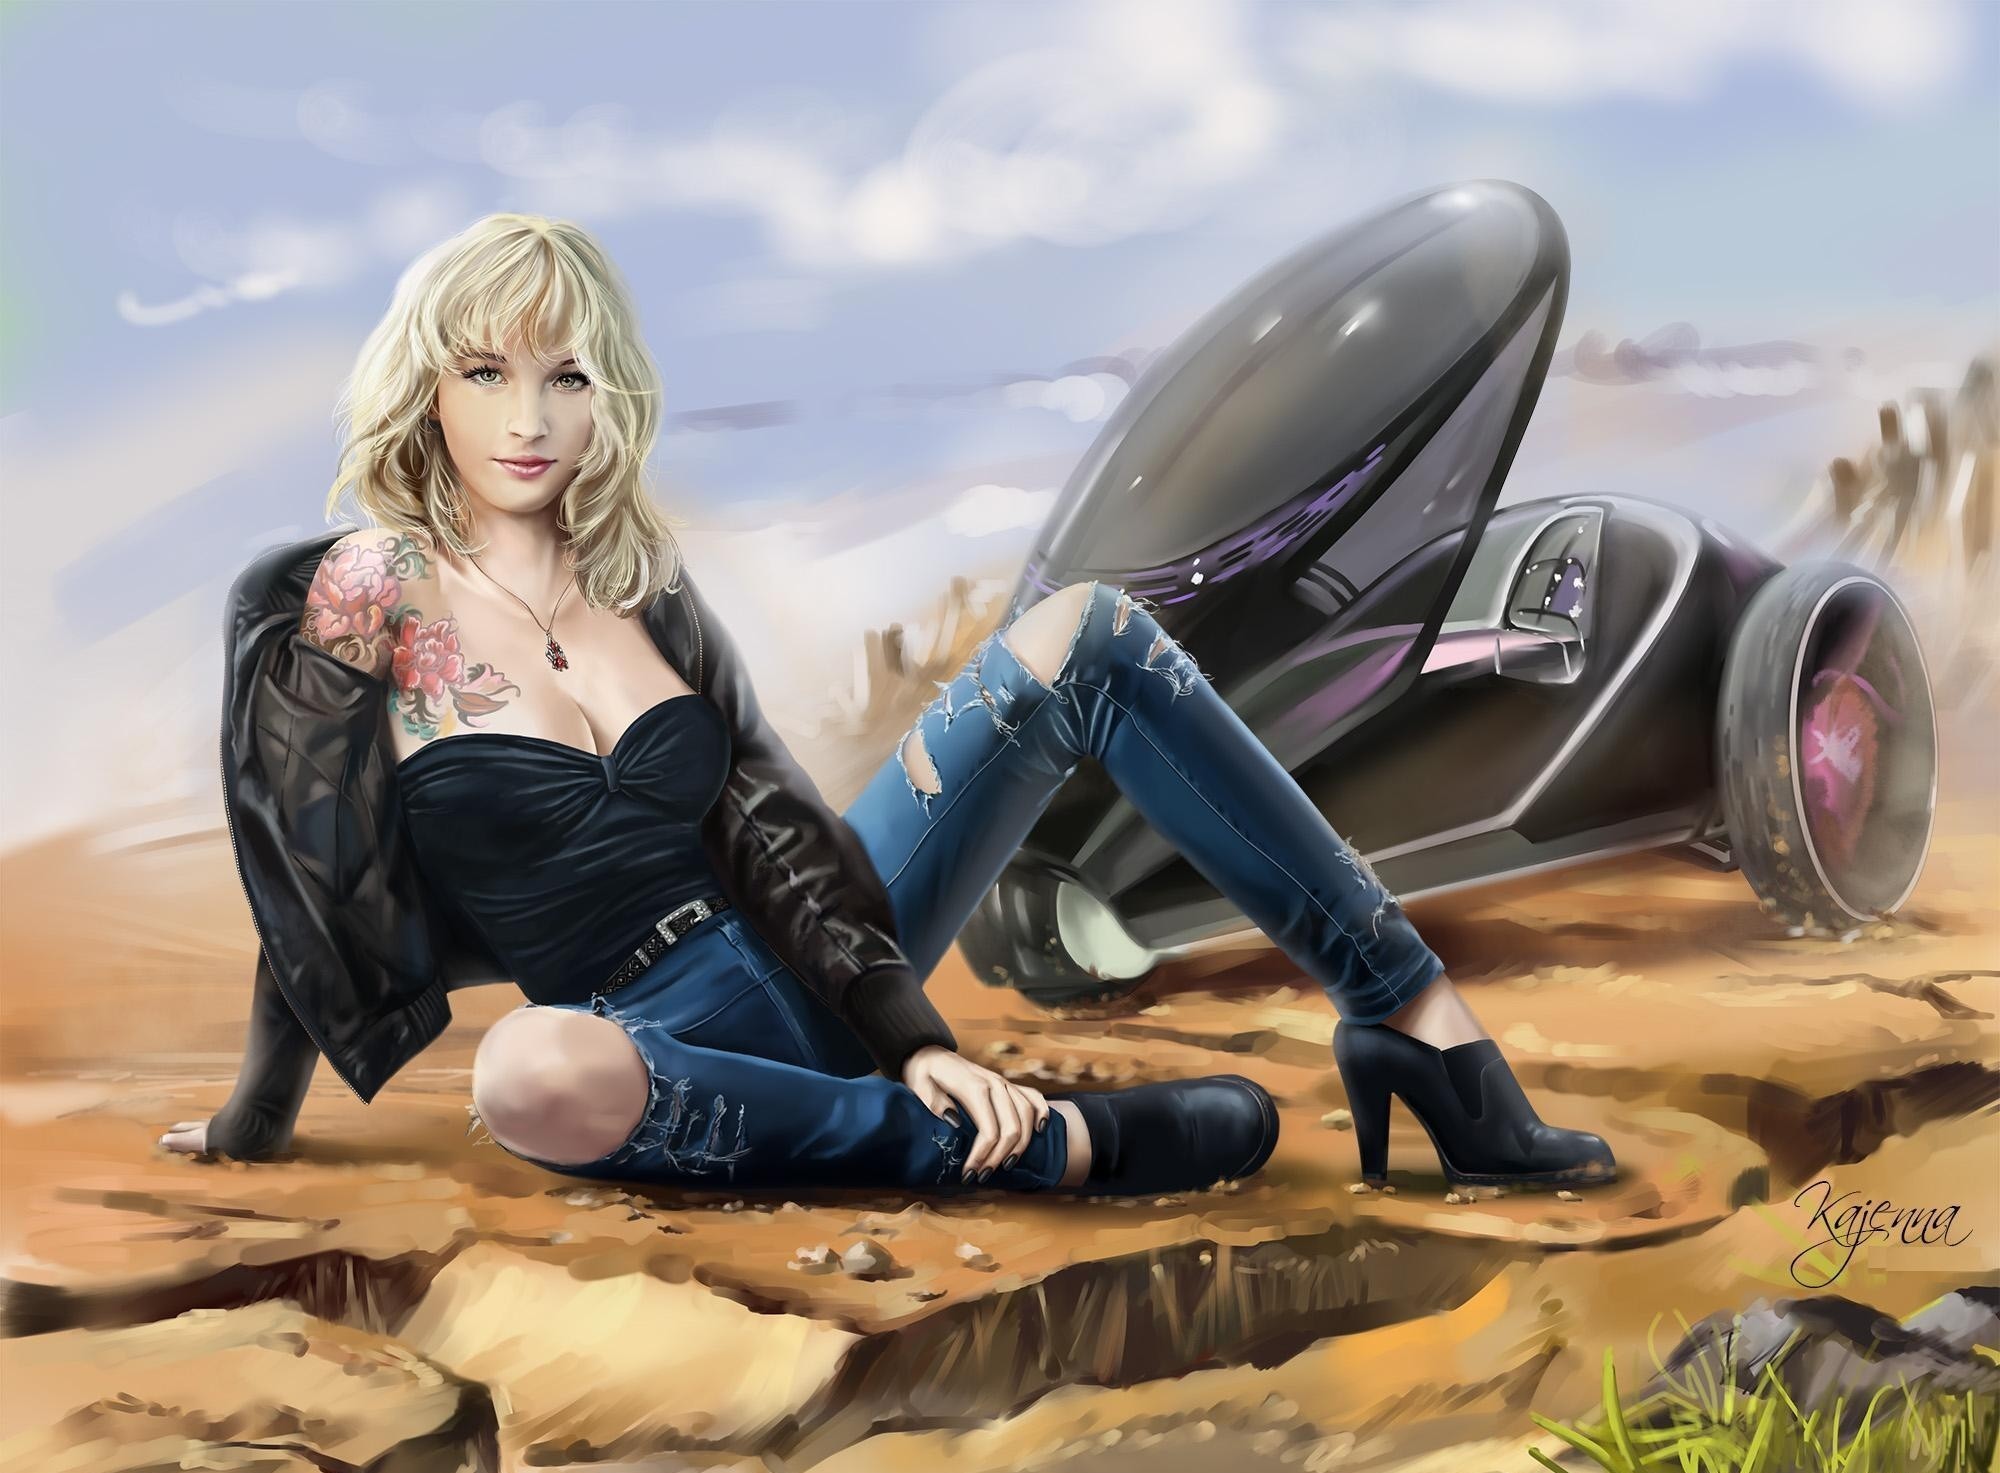 General 2000x1473 painting women with cars science fiction futuristic science fiction women vehicle inked girls blonde necklace torn jeans torn clothes heels sitting